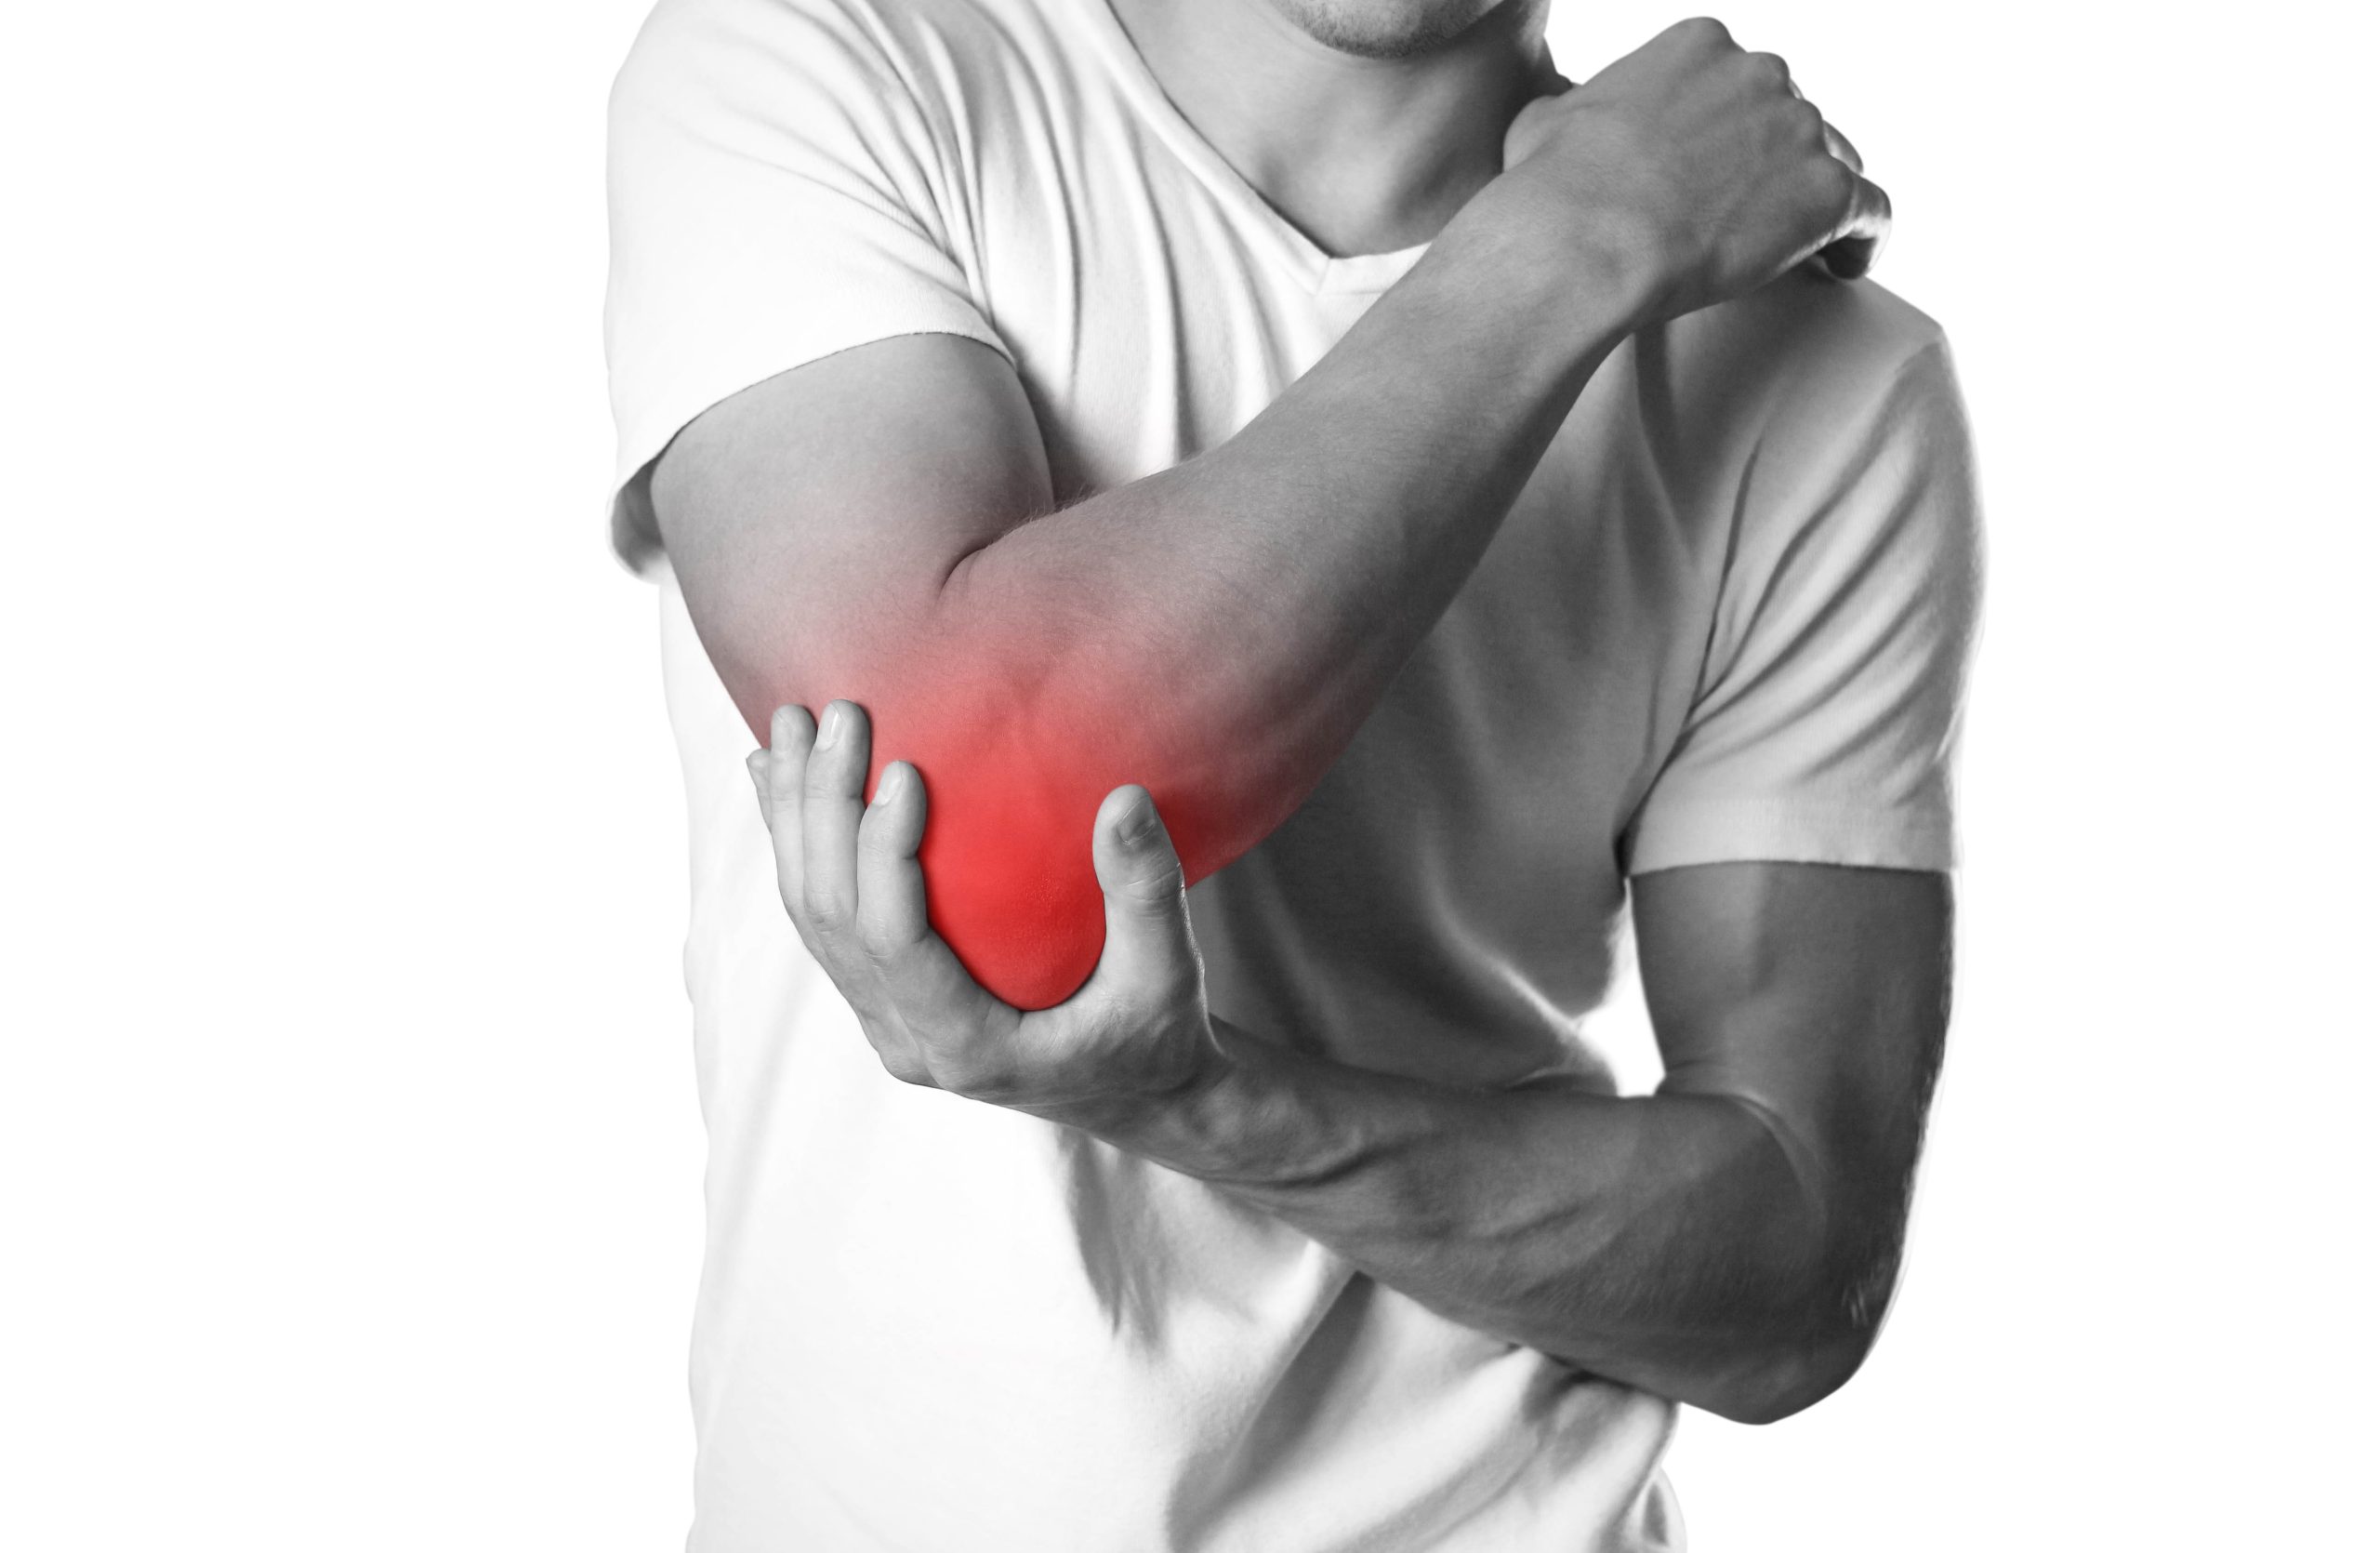 A man holding hands. Pain in the elbow. The hearth is highlighted in red. Close up. Isolated on white background.